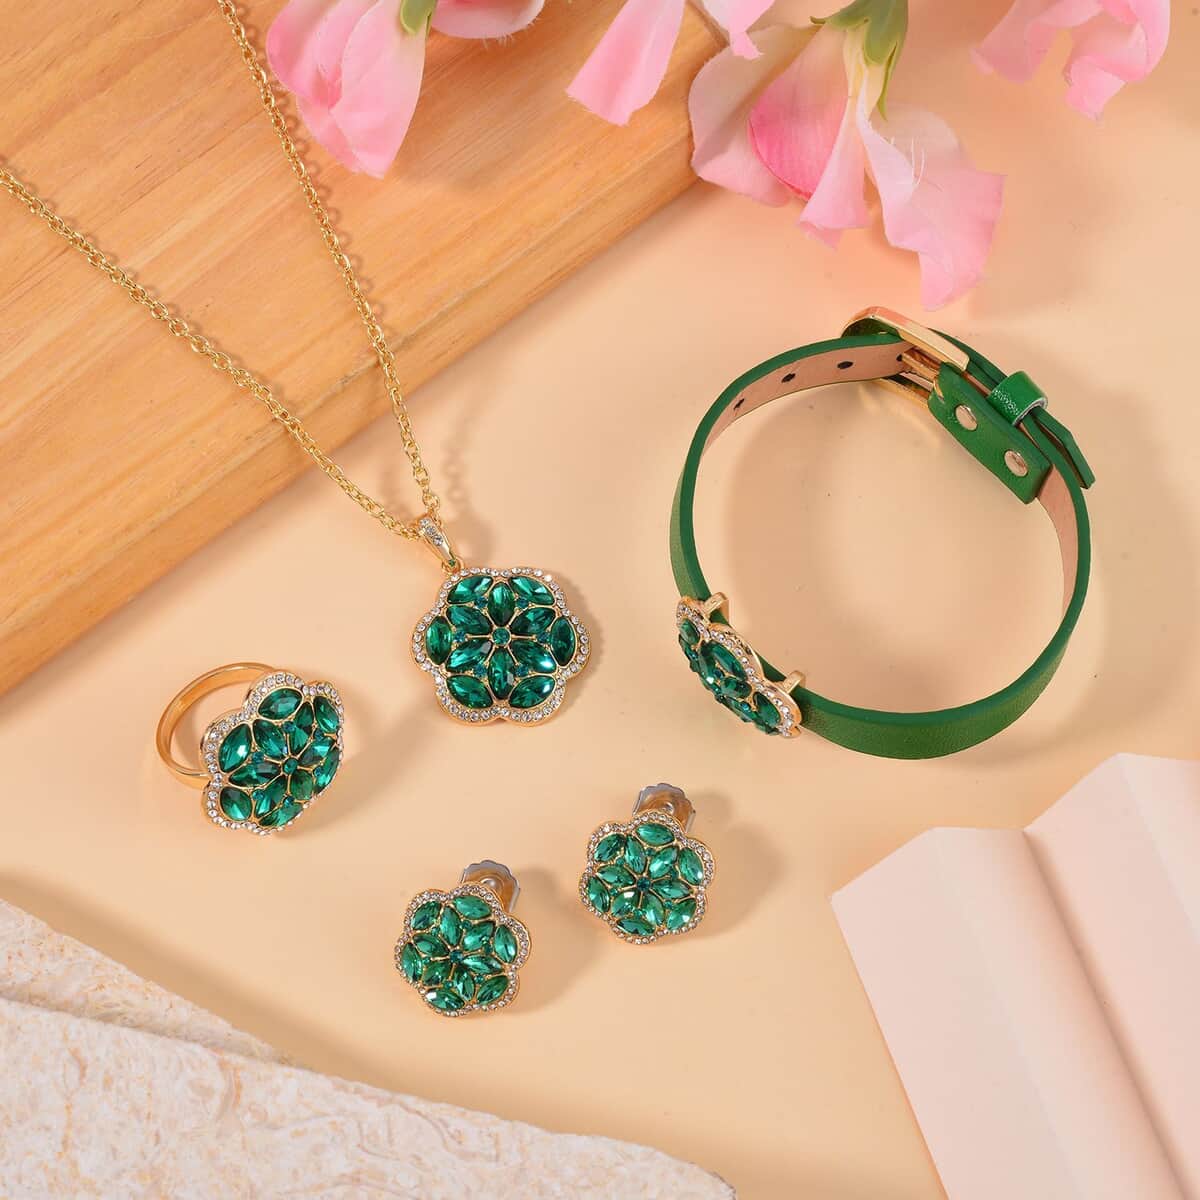 Green and White Austrian Crystal, Faux Leather Floral Bracelet (6-8In), Earrings, Ring (Size 8.0) and Pendant Necklace 20-22 Inches In Goldtone image number 1